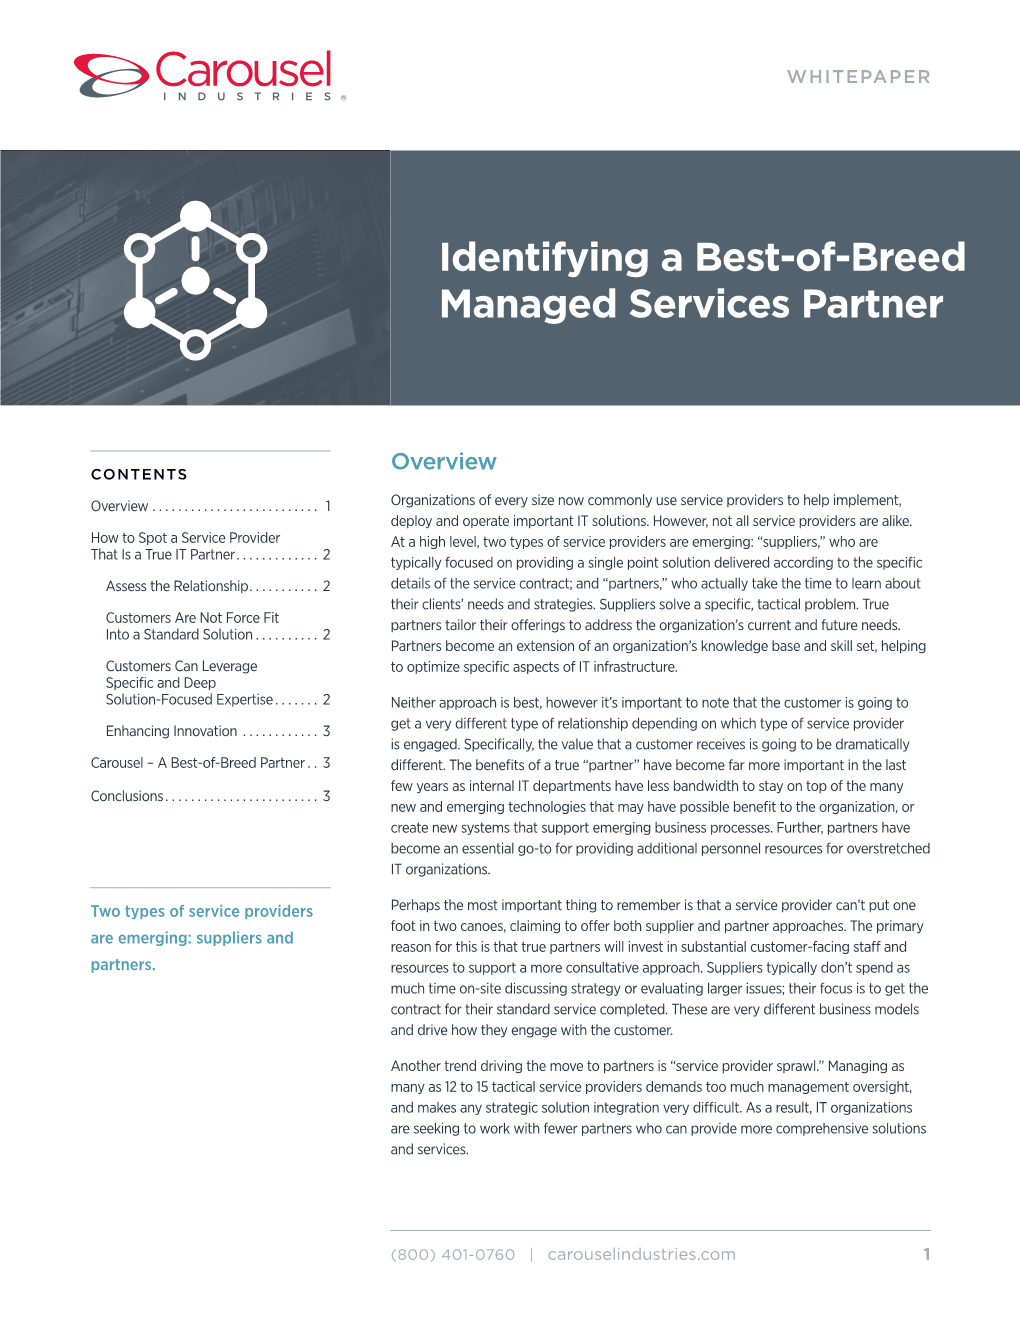 Identifying a Best-Of-Breed Managed Services Partner